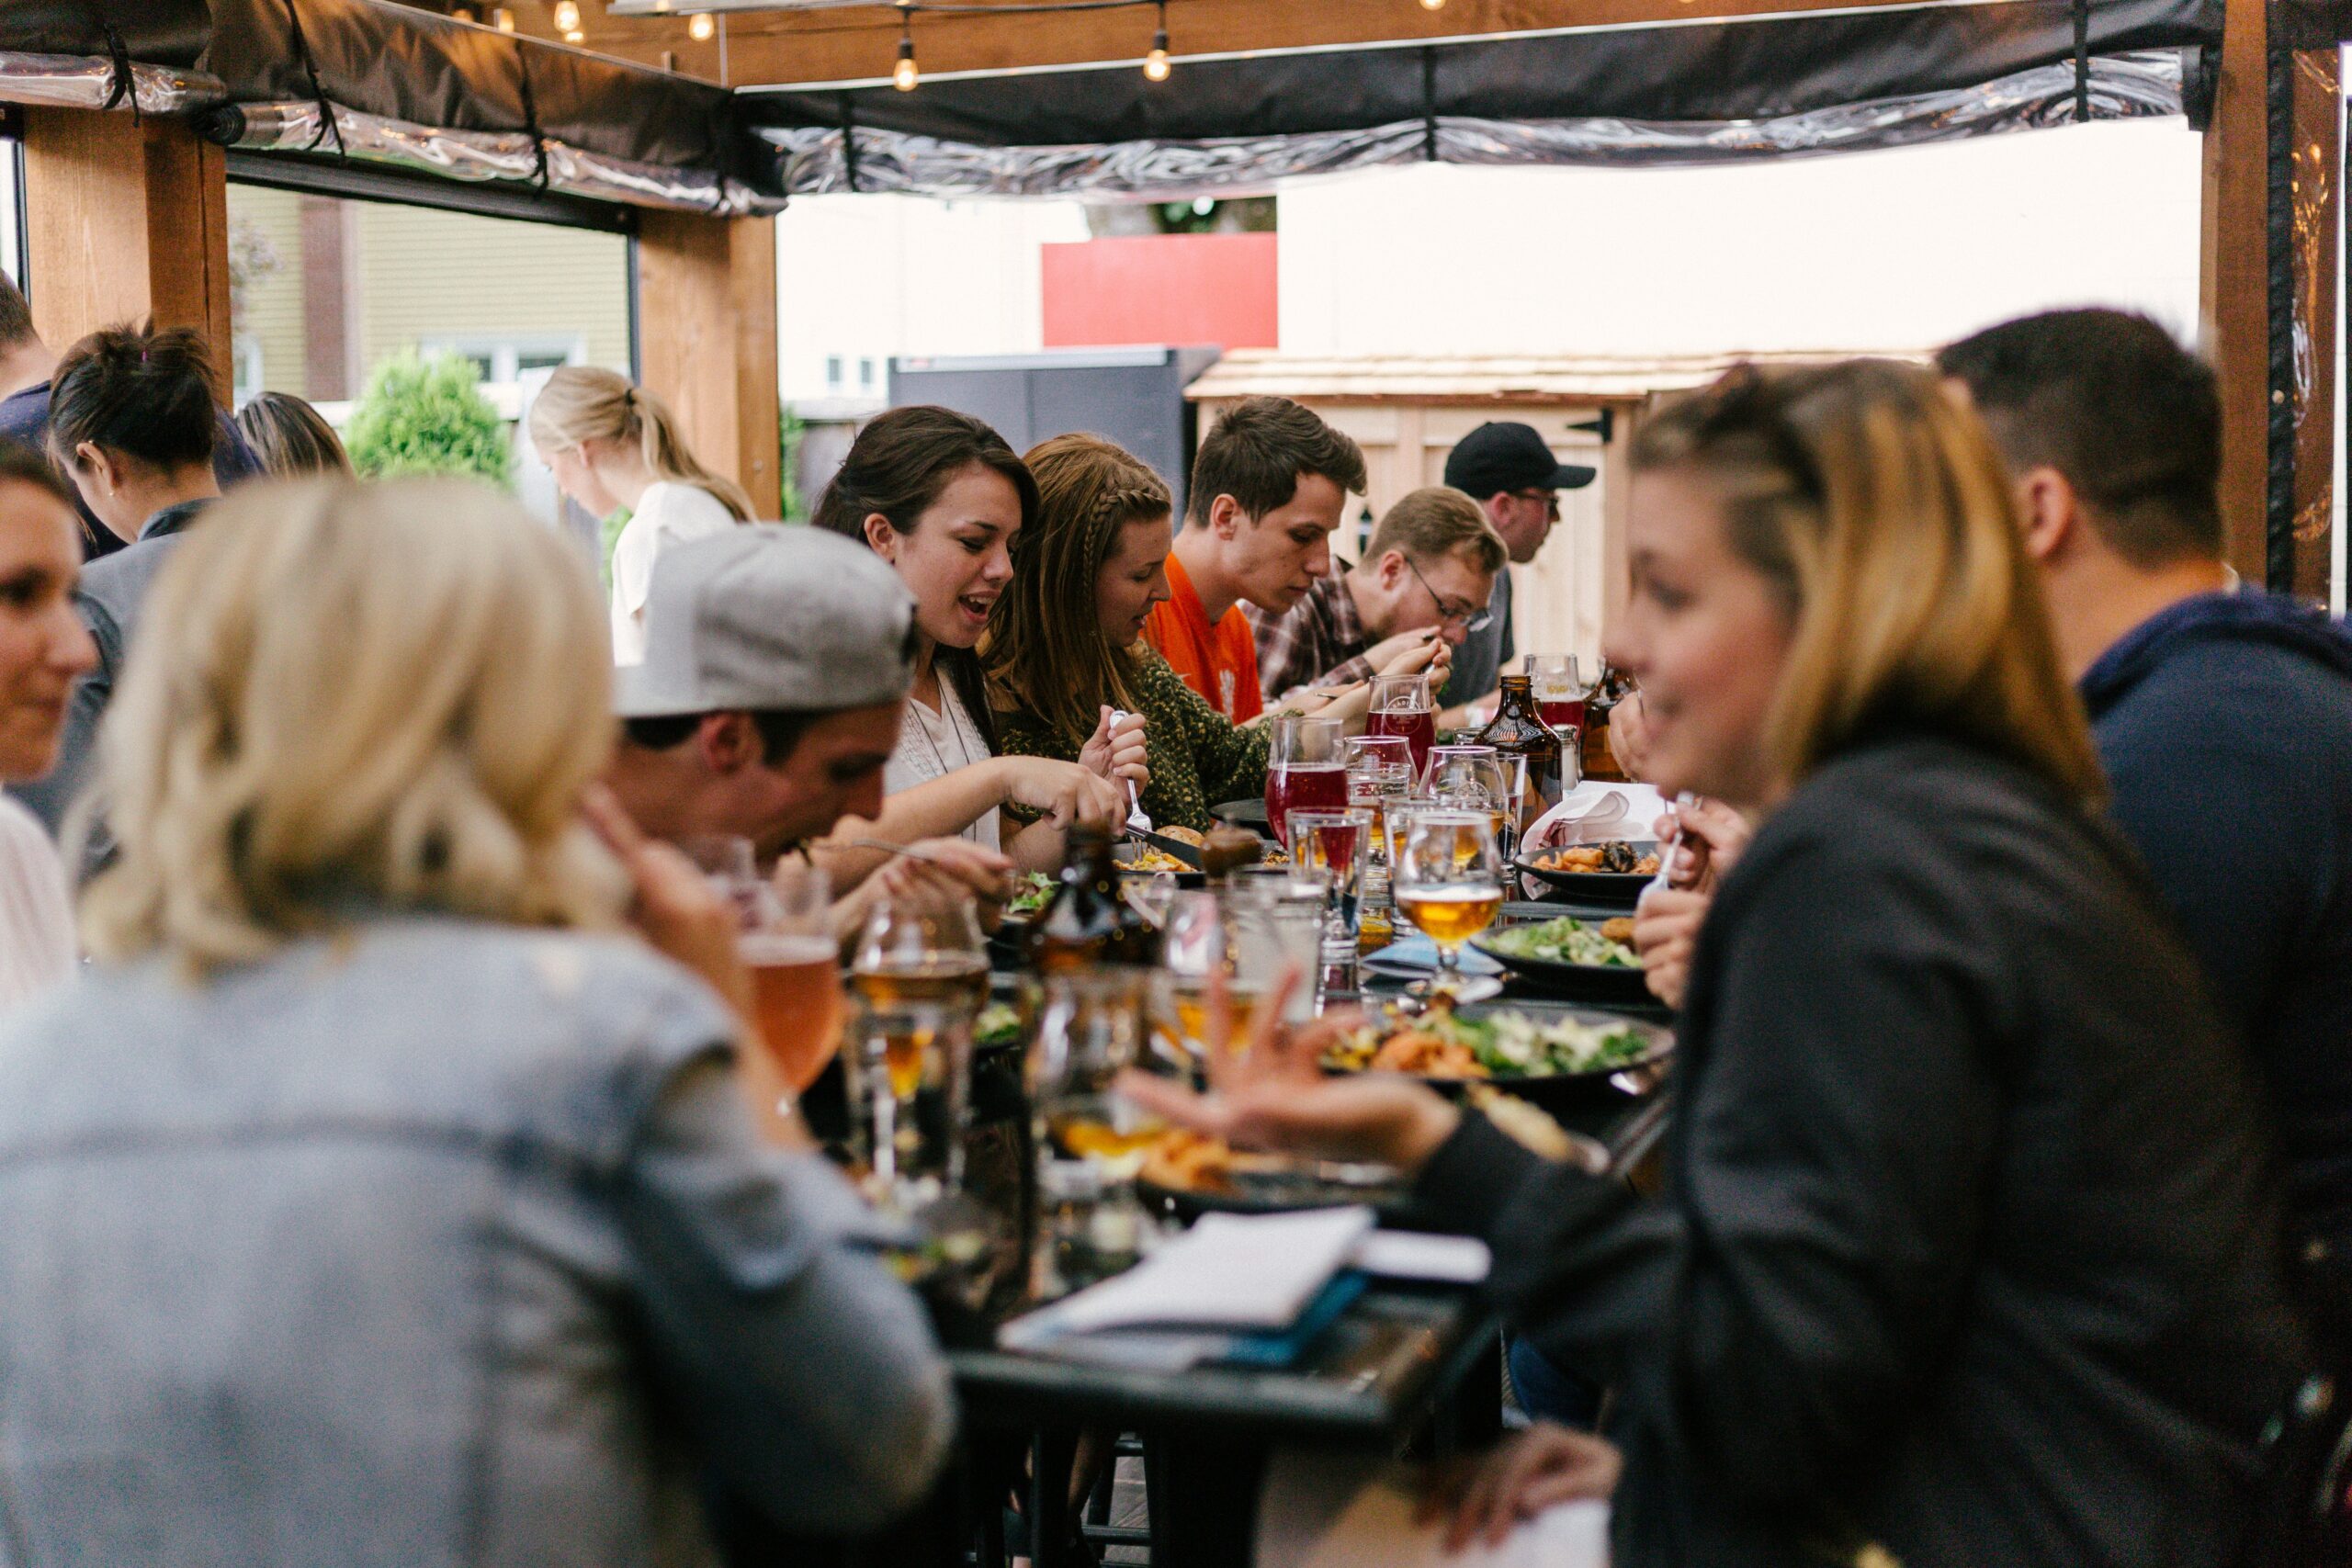 Group of diverse people enjoying a meal at a busy outdoor restaurant with glasses of beer and plates of food on a wooden table.